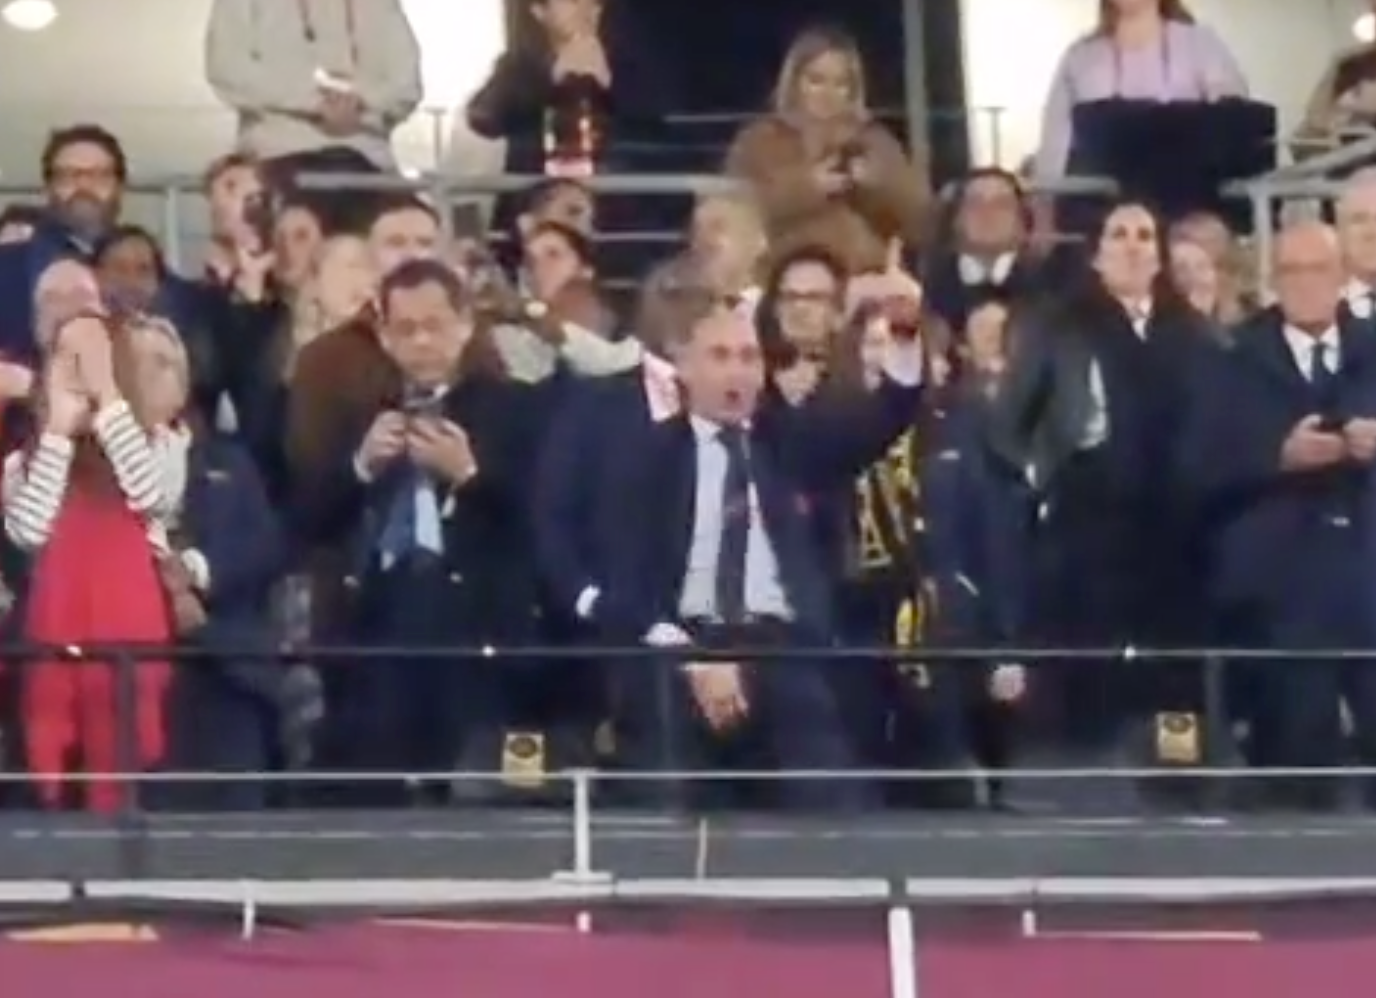 Rubiales appeared to grab his crotch during the victory celebrations